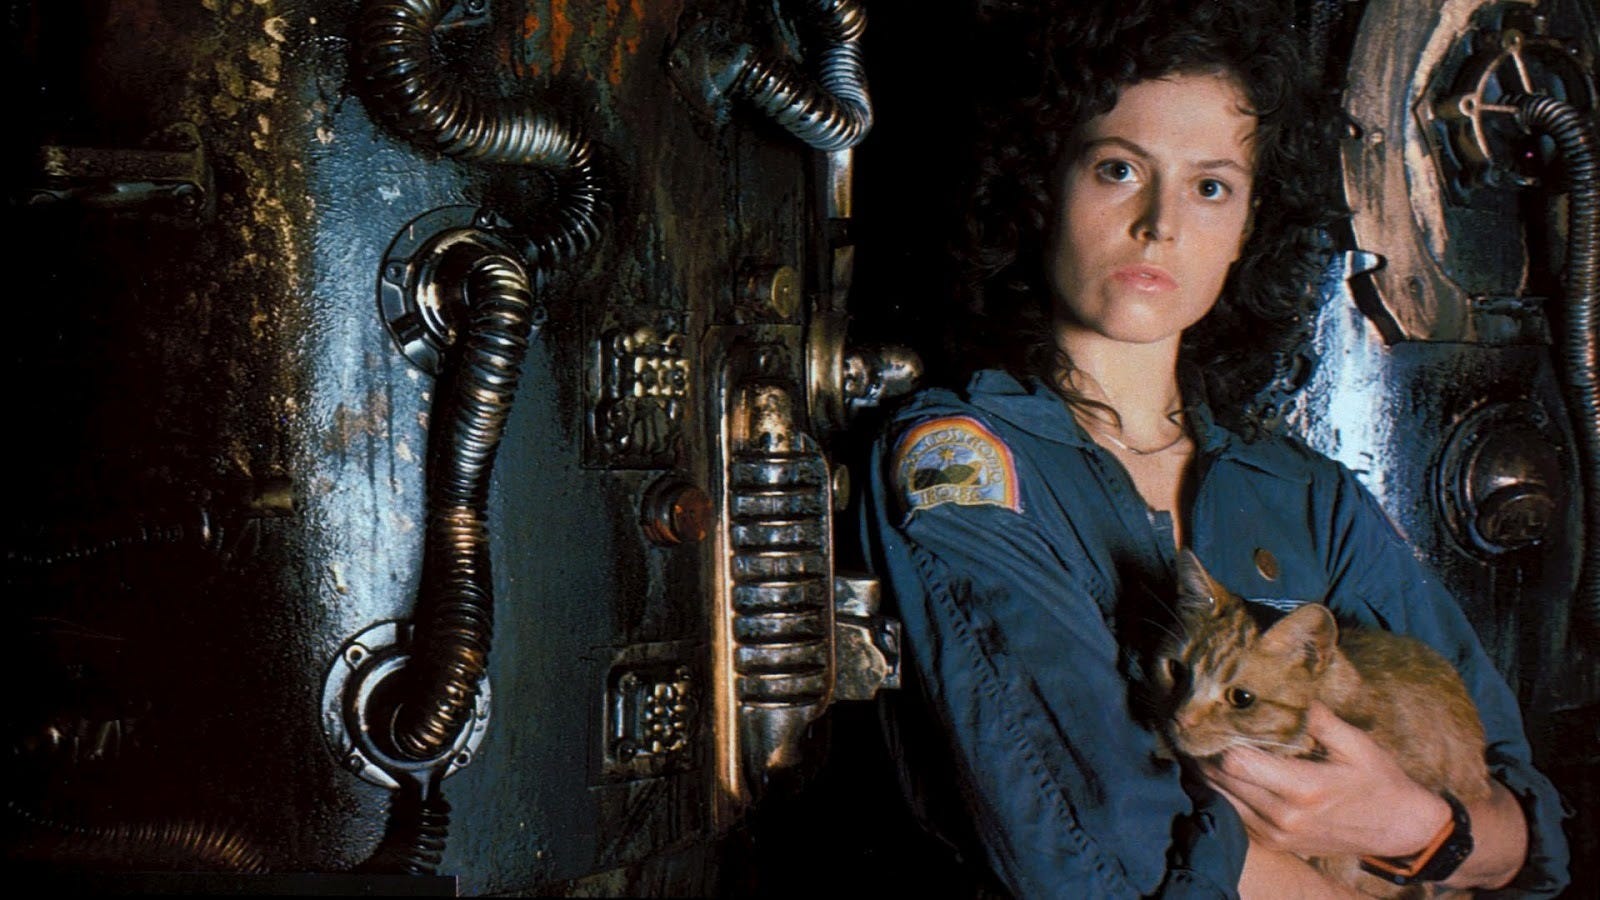 <p>Directed by Fede Álvarez, it will be the first new "Alien" release since Disney <a href="https://markets.businessinsider.com/news/stocks/21st-century-fox-completes-distribution-in-connection-with-disney-acquisition-1028041546">acquired Fox in 2019</a>.</p><p>Variety <a href="https://variety.com/2023/film/news/alien-romulus-set-between-first-two-cailee-spaeny-1235810521/">reports</a> the movie will take place between 1979's "Alien" and 1986's "Aliens" and will be titled "Alien: Romulus."</p>